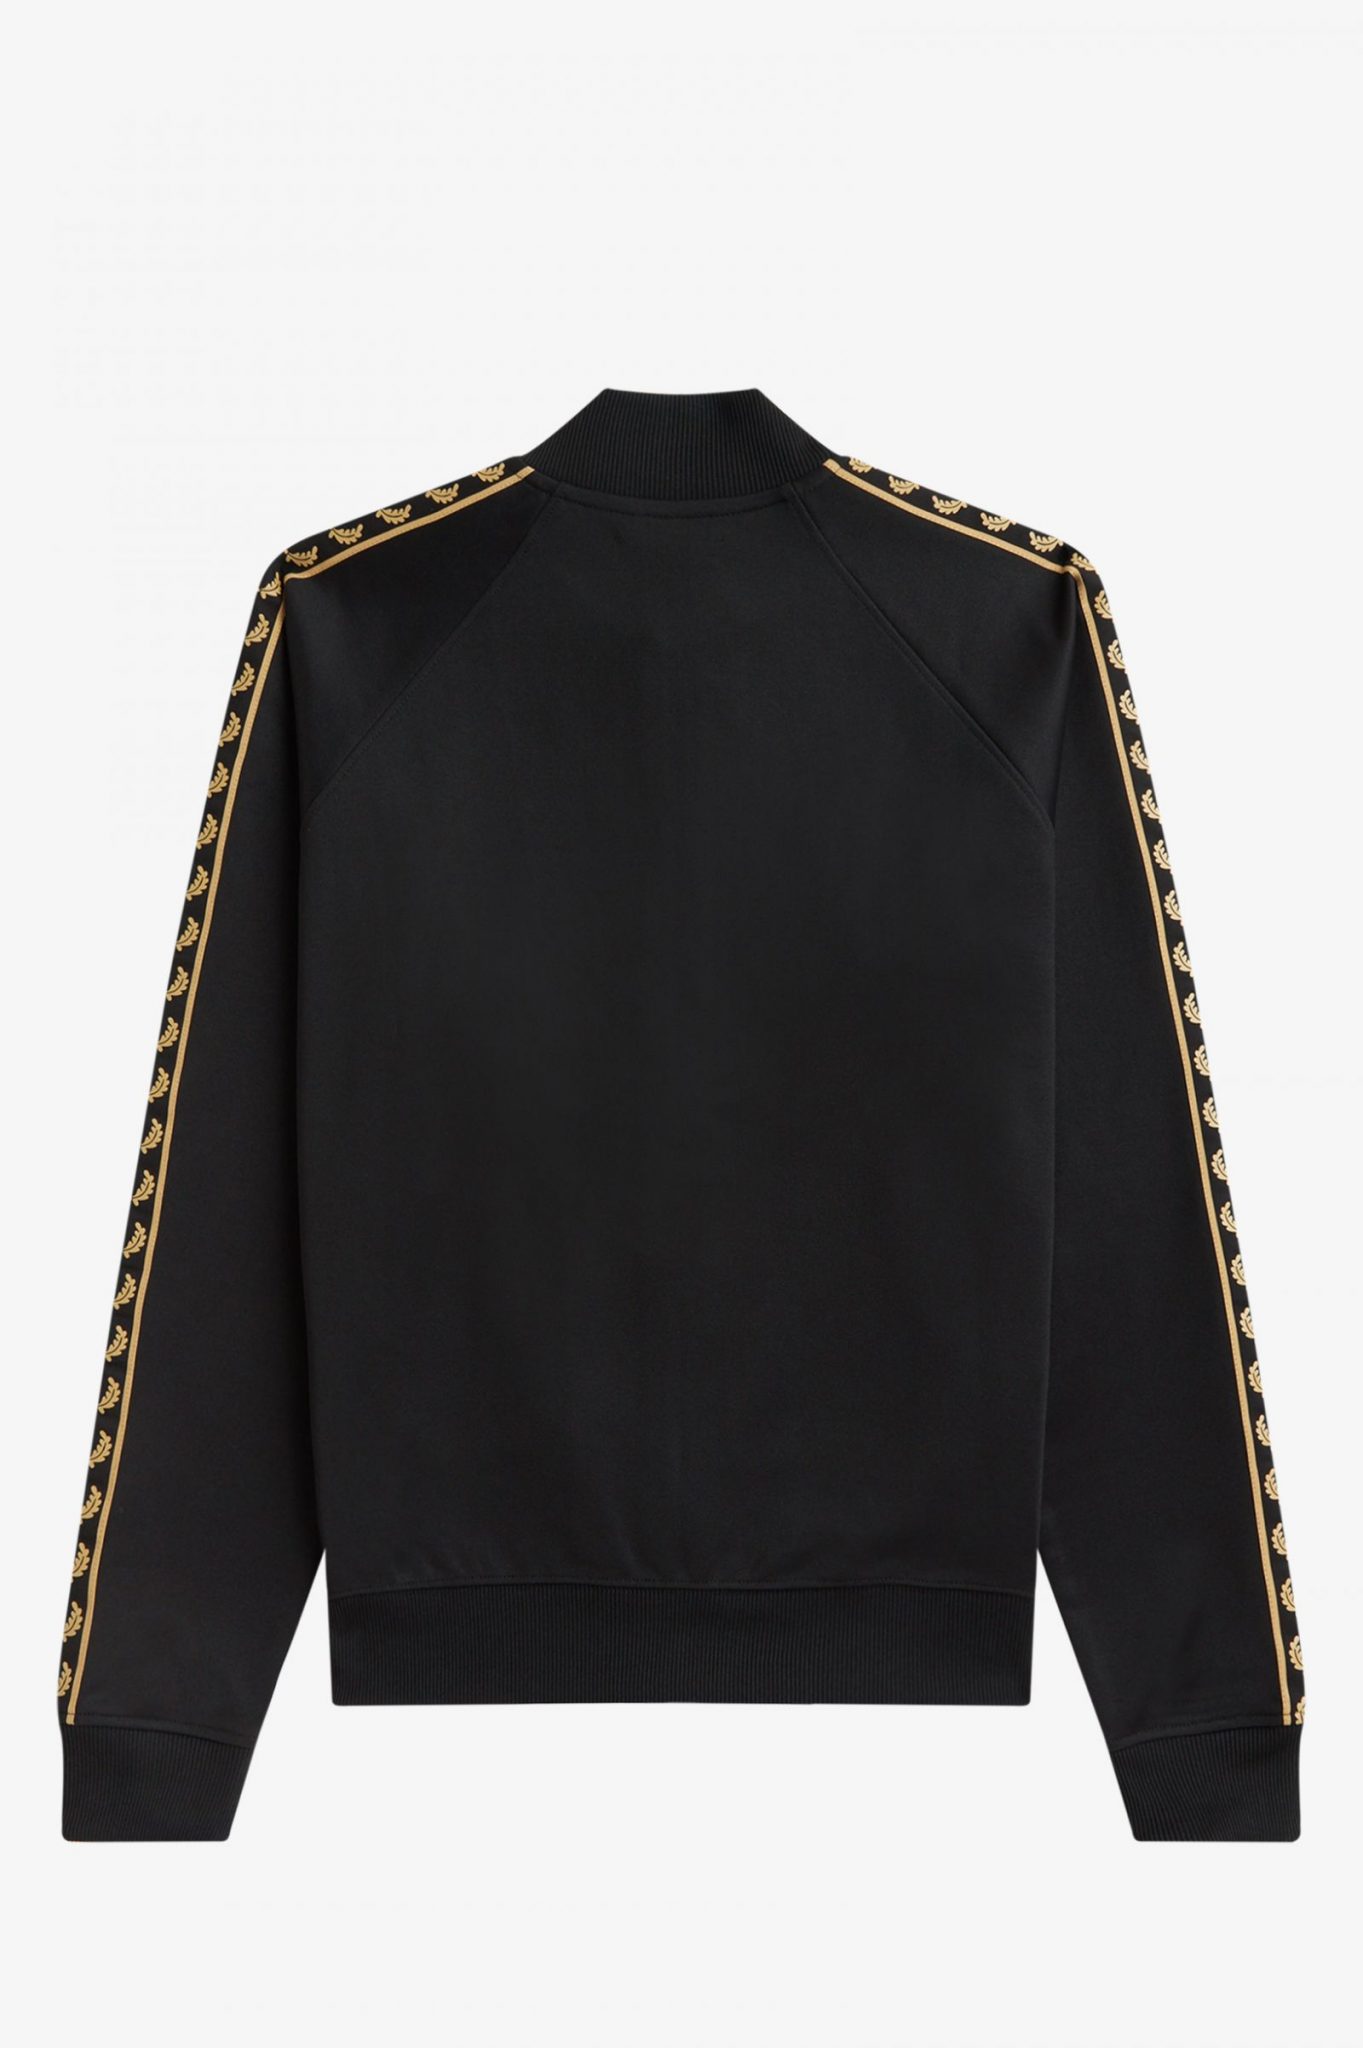 Buy Fred Perry Gold Tape Bomber Track Jacket Black - Scandinavian ...